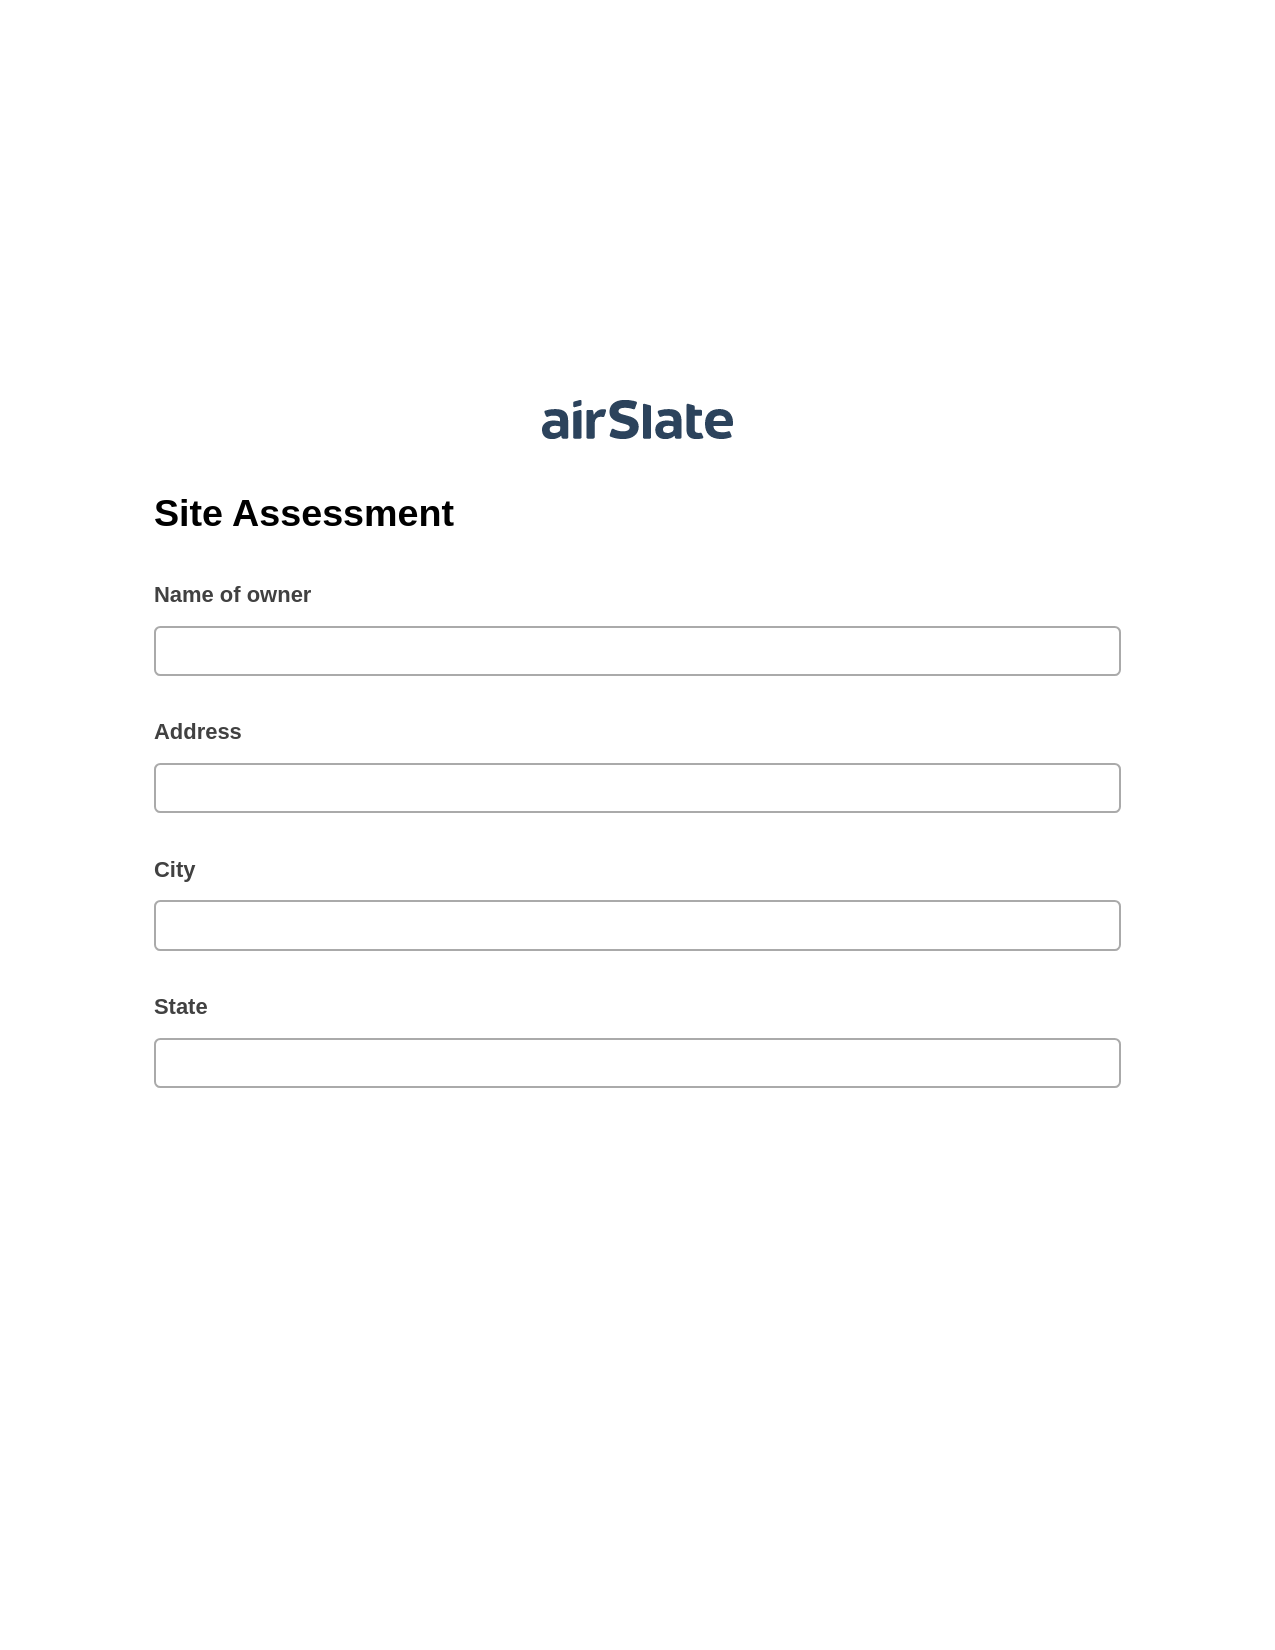 Multirole Site Assessment Pre-fill Dropdowns from Smartsheet Bot, In-person Signing Bot, Archive to SharePoint Folder Bot